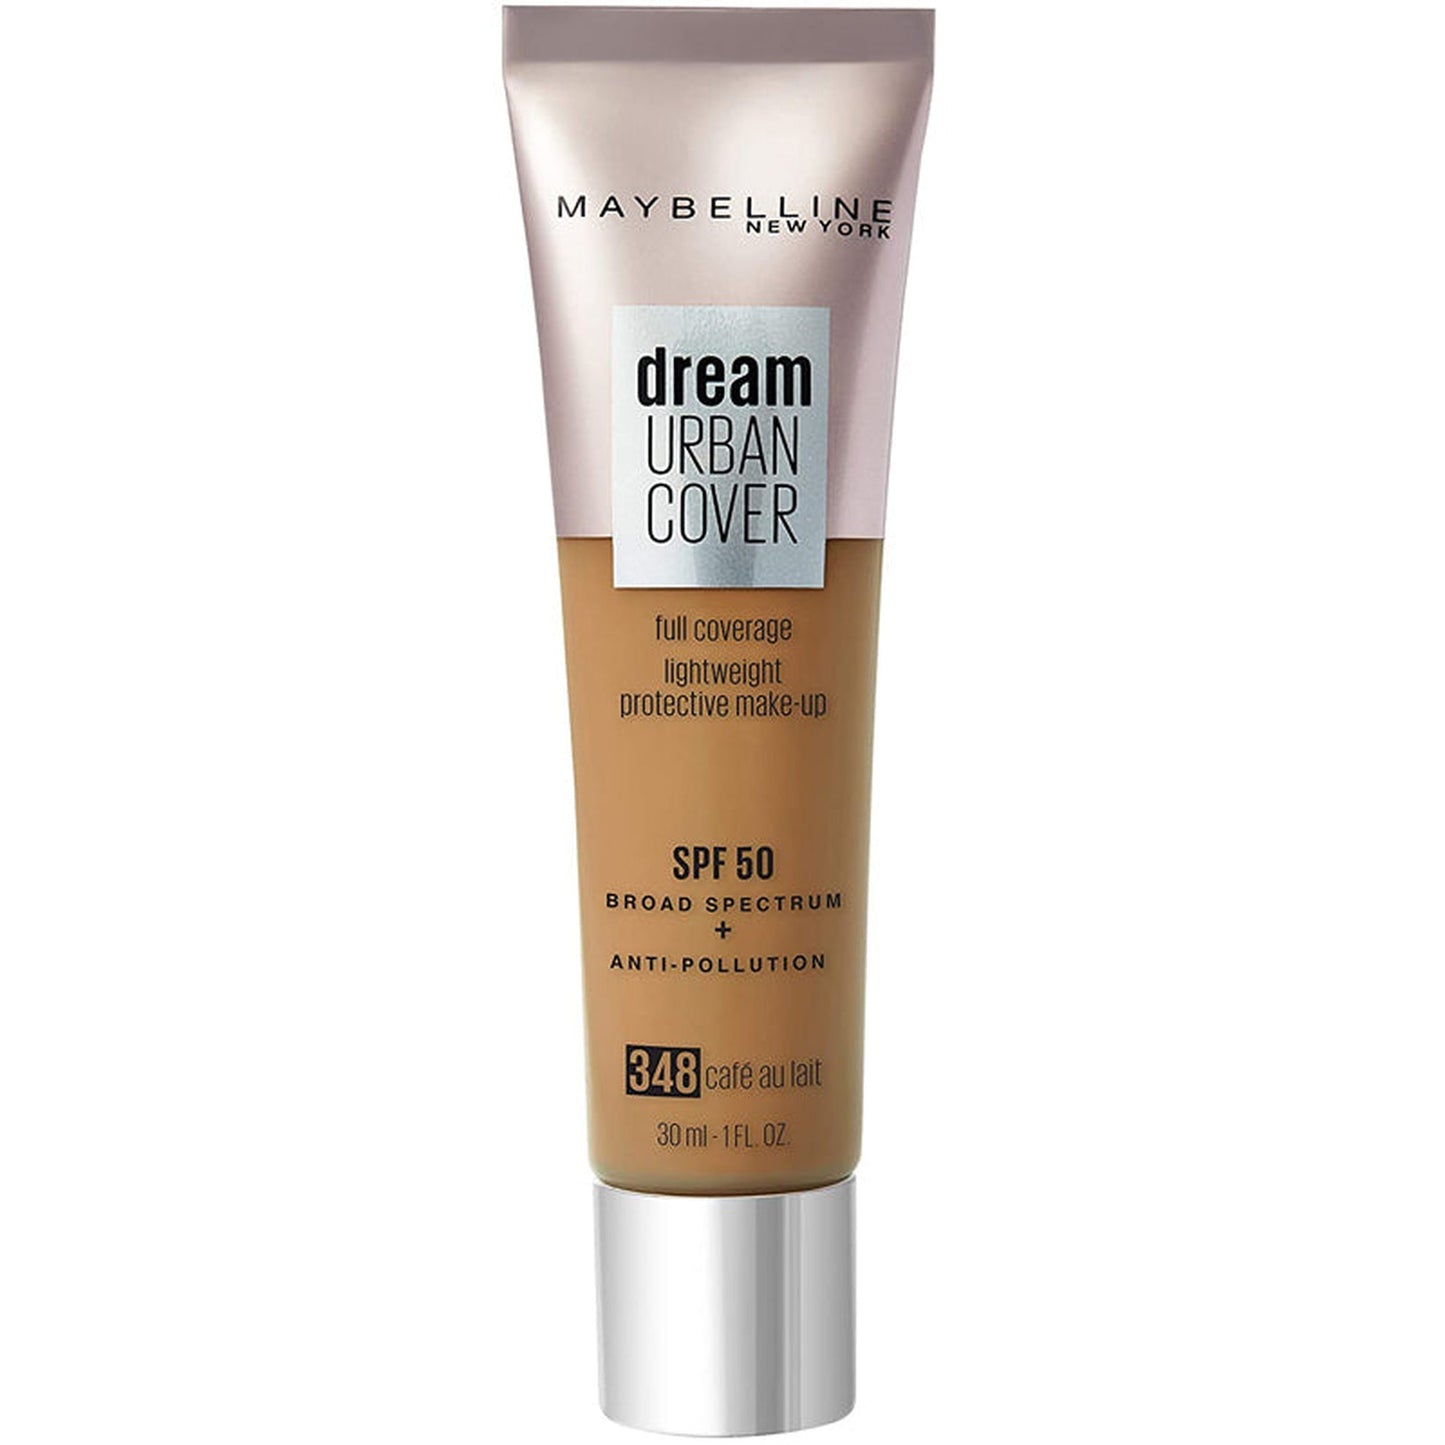 Maybeline Dream Urban Cover Foundation SPF50 - 348 Cafe Au Lait-Maybelline-BeautyNmakeup.co.uk